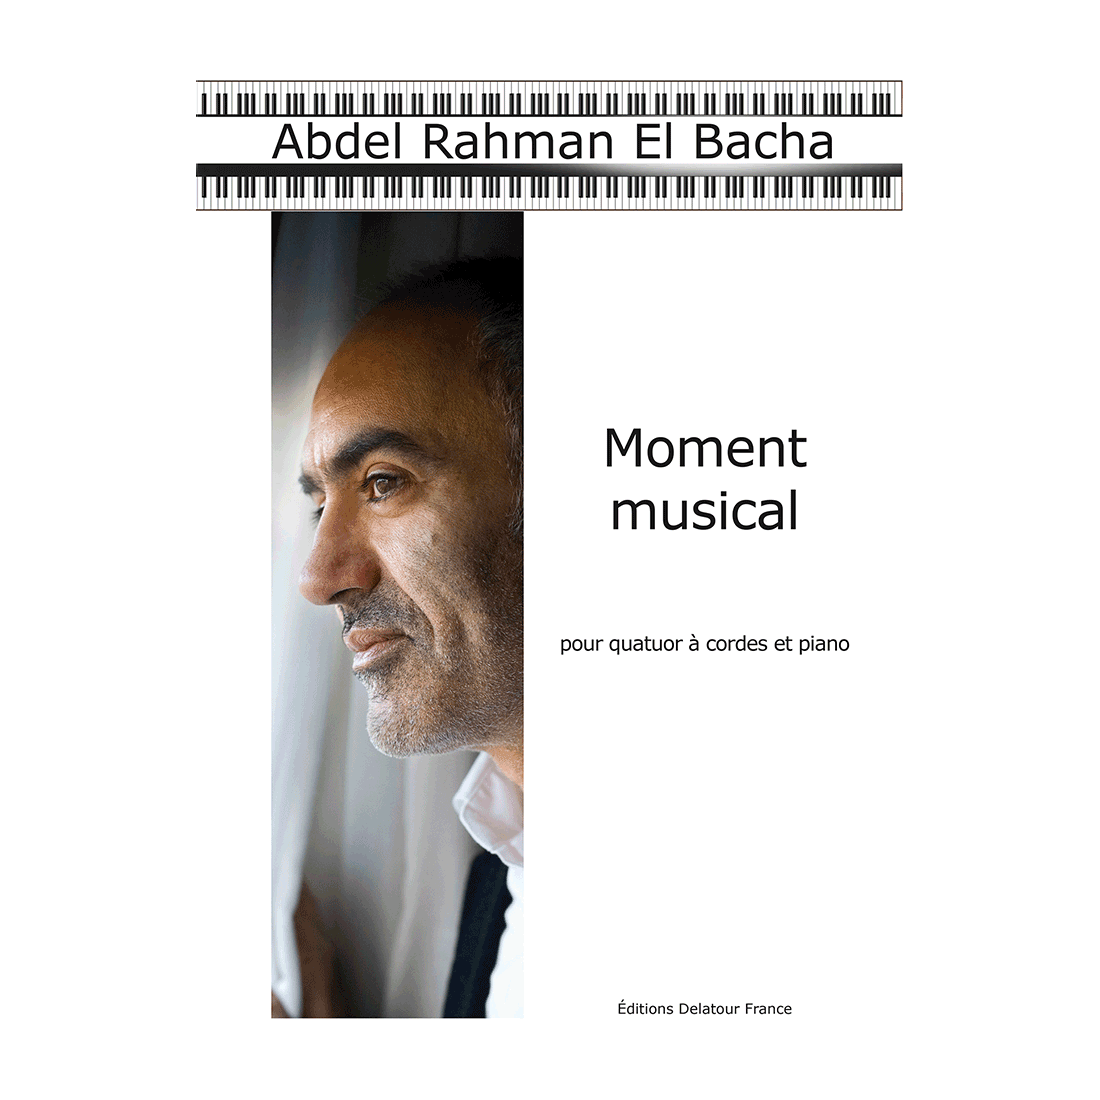 Moment musical for string quartet and piano